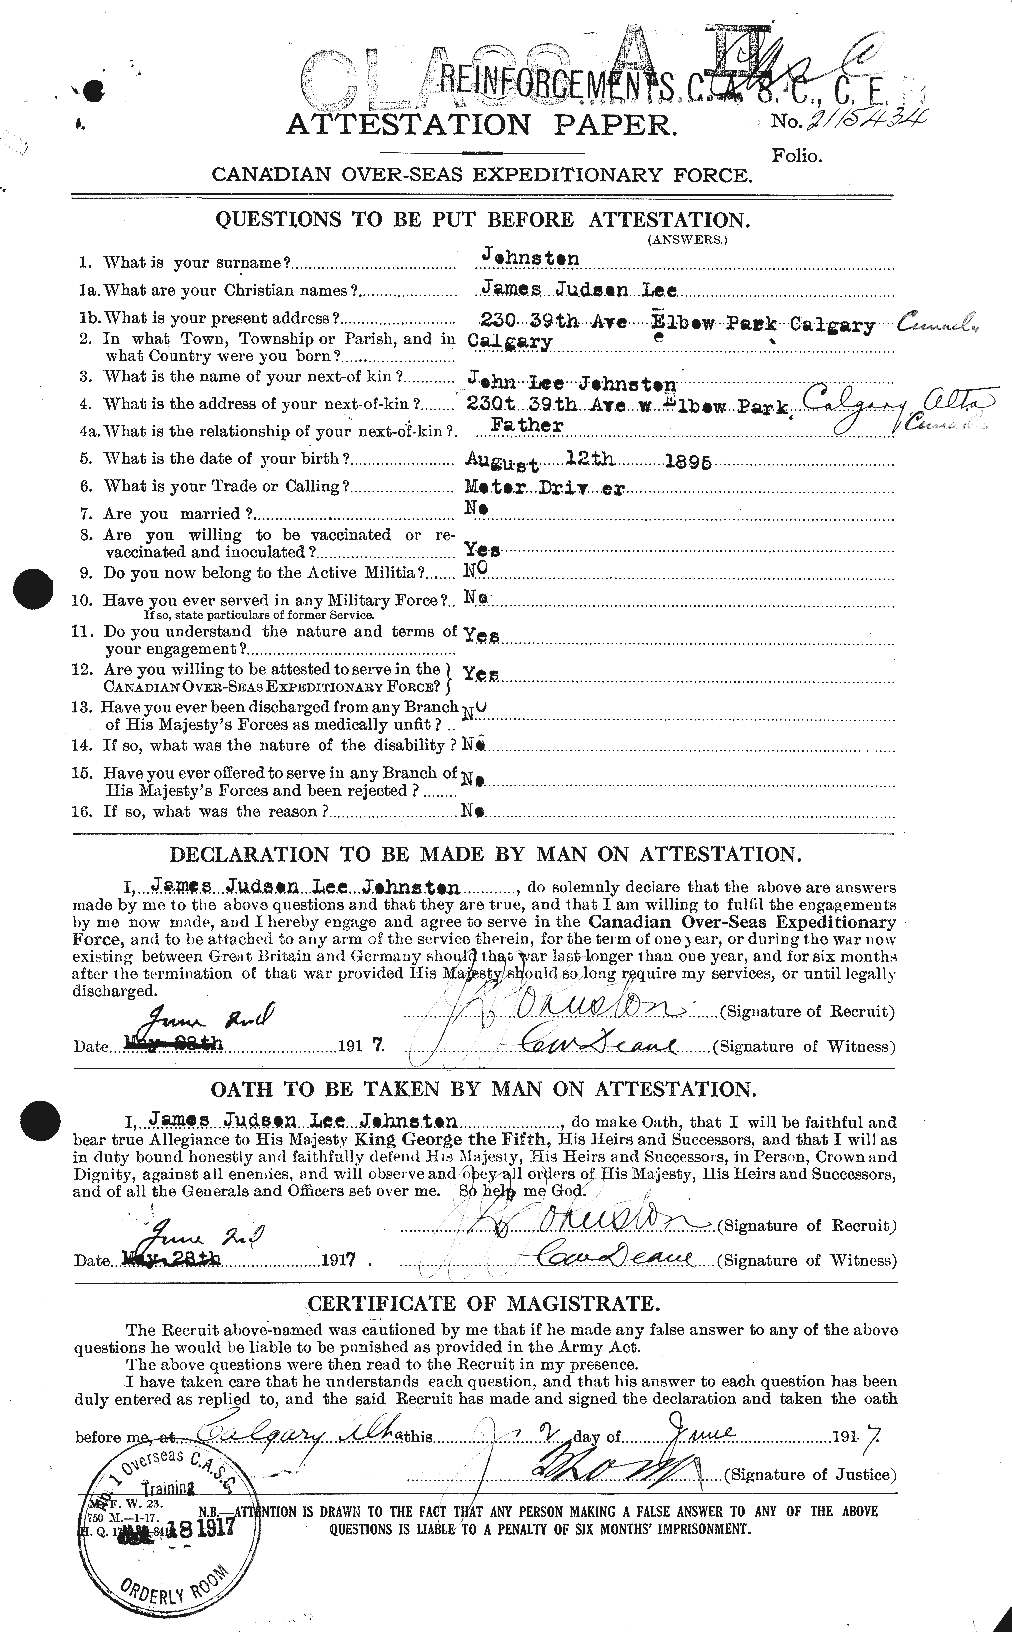 Personnel Records of the First World War - CEF 422741a